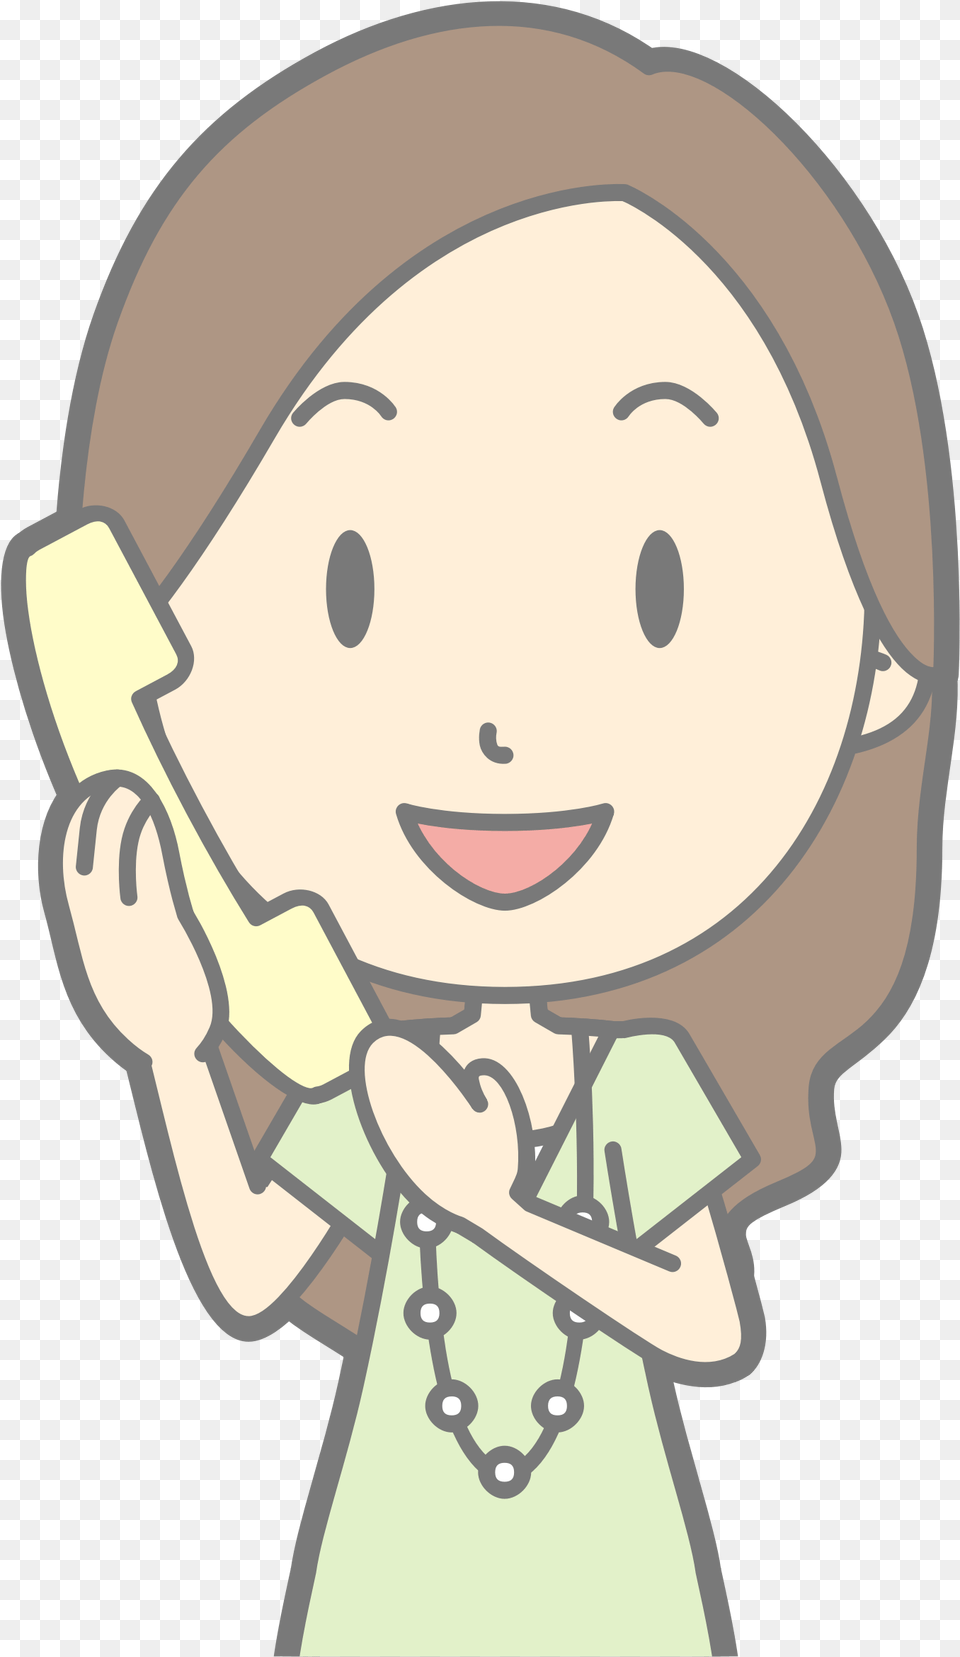 Female Using Telephone Girl On Phone Clipart Transparent Public Domain Clipart Phone, Electronics, Baby, Person, Mobile Phone Png